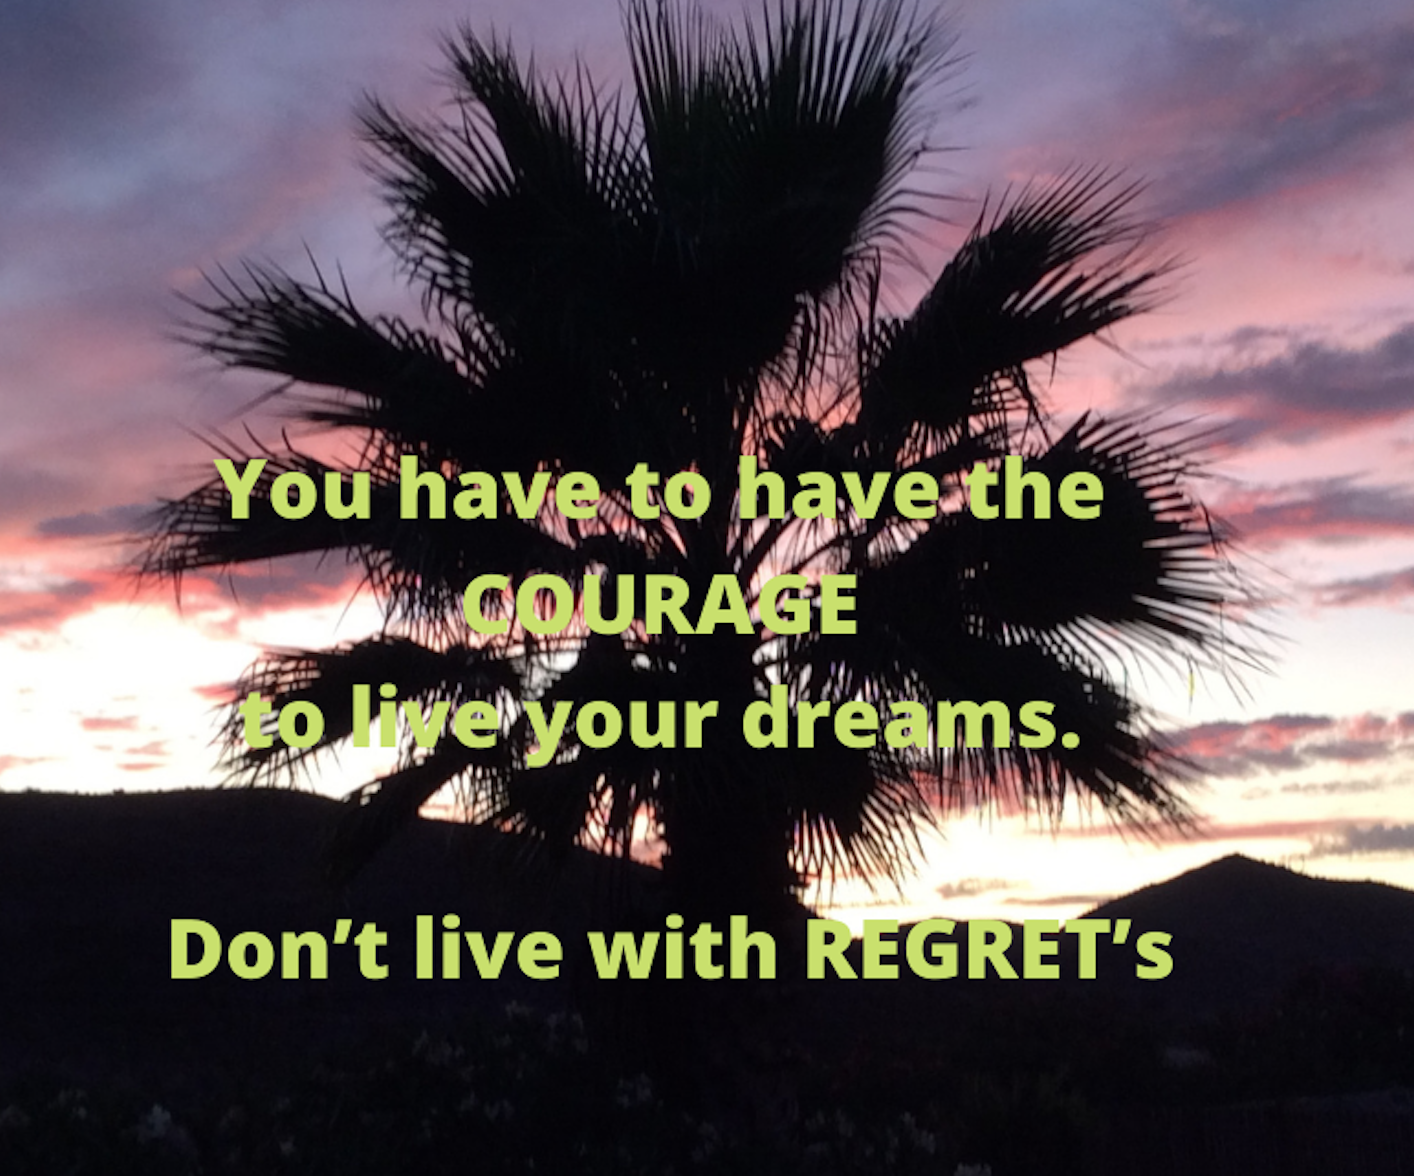 You have to have courage to live your dreams. Don't live with regrets.